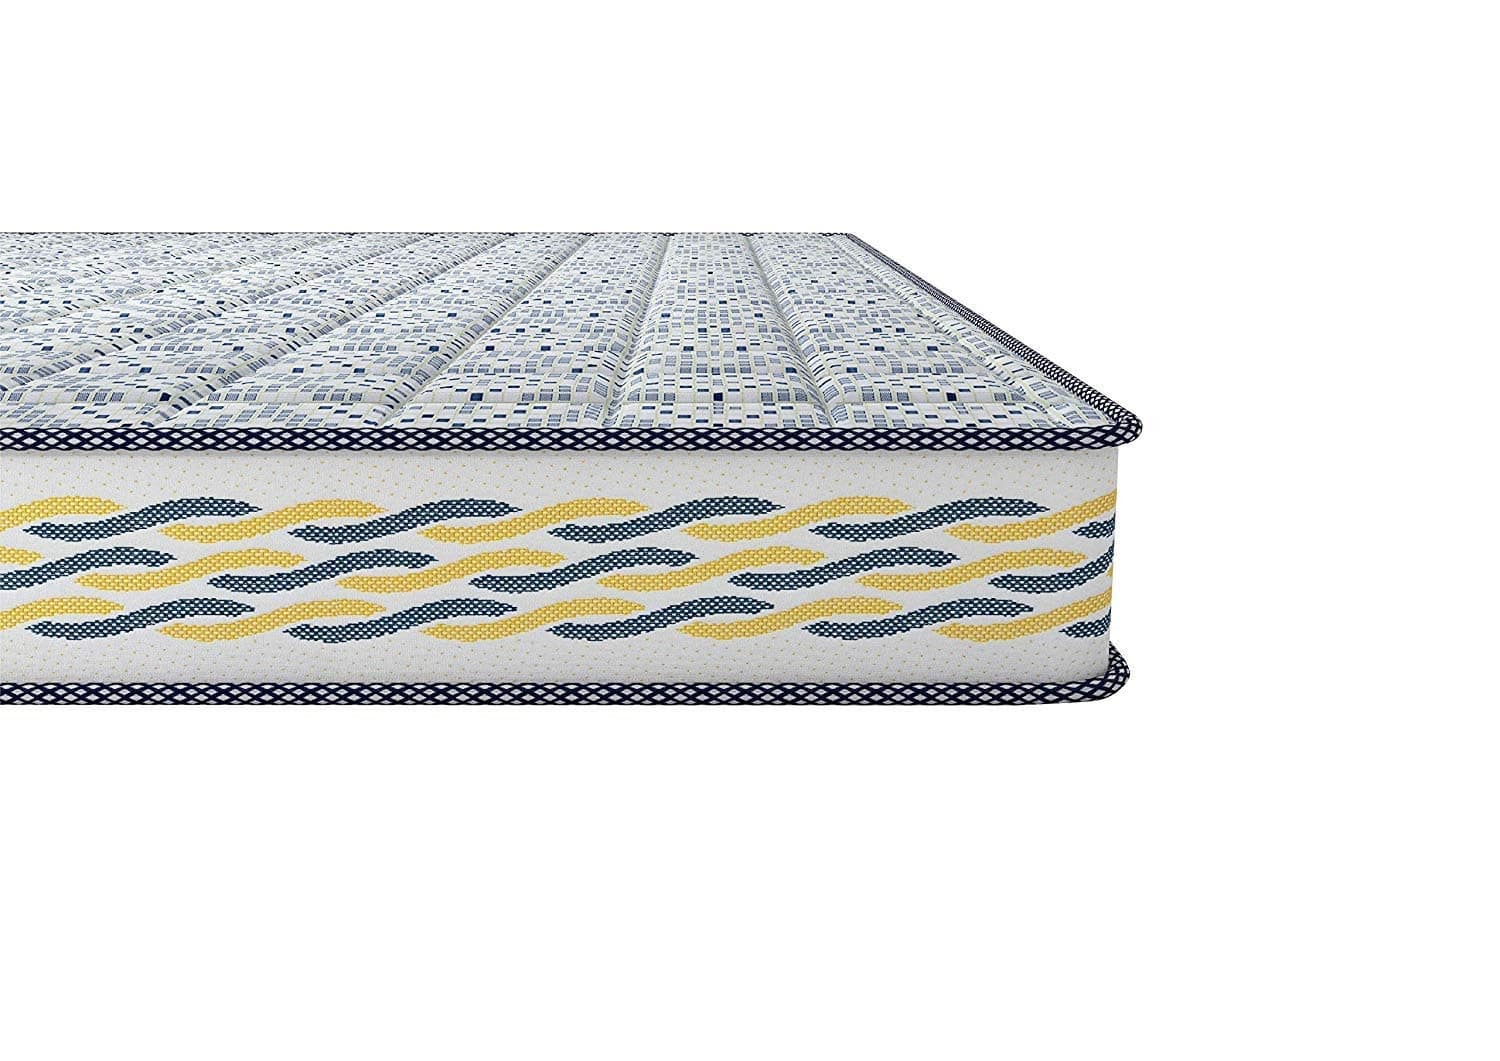 sheets for a 48 x 72 inch mattress